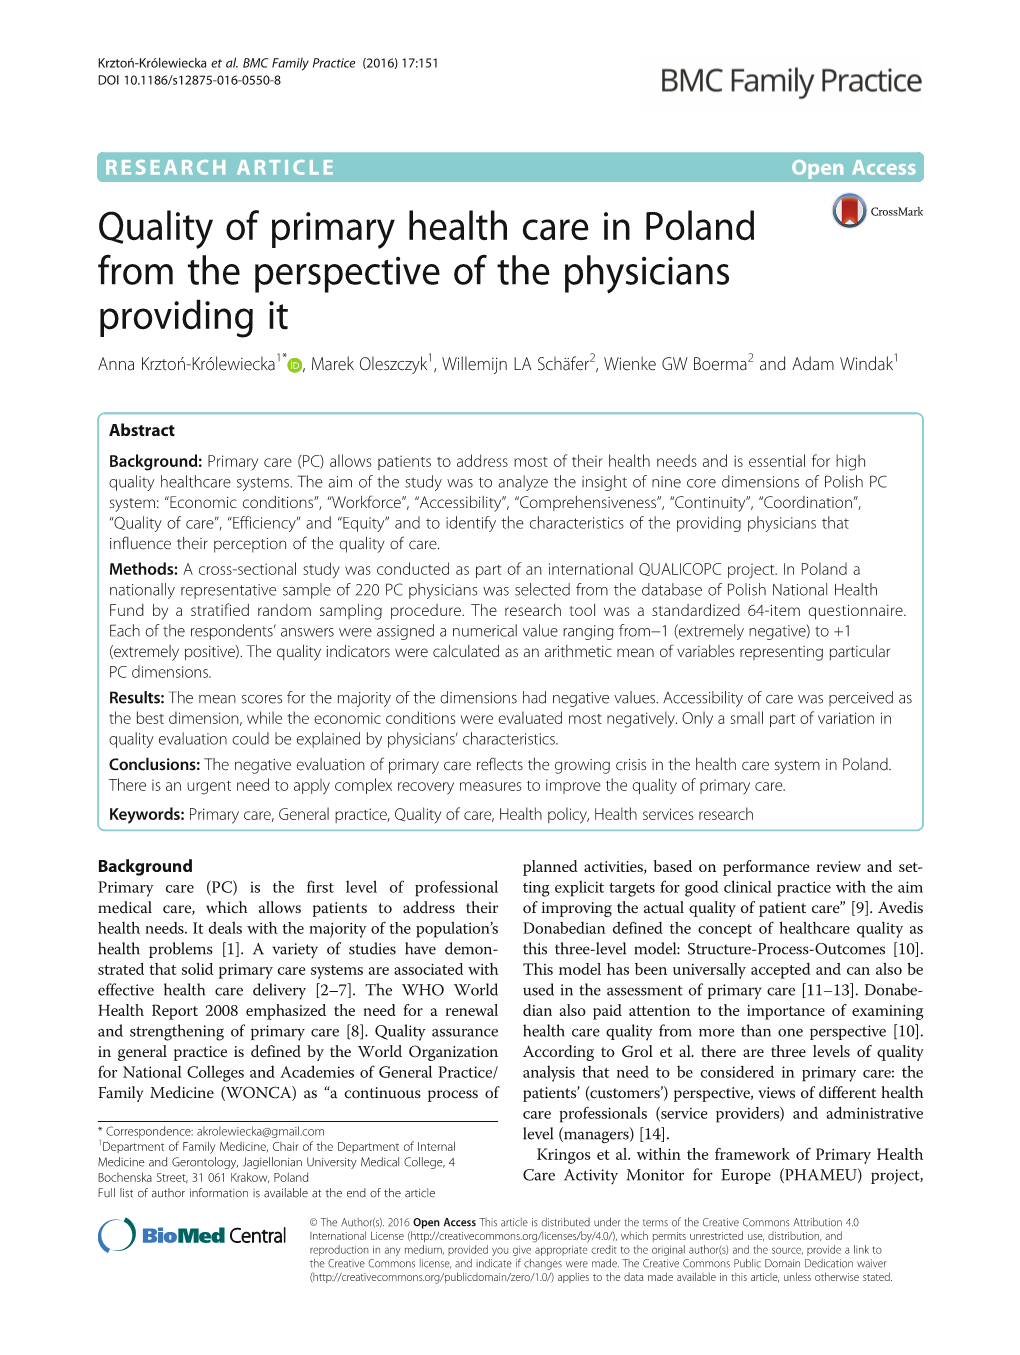 Quality of Primary Health Care in Poland from the Perspective of the Physicians Providing It